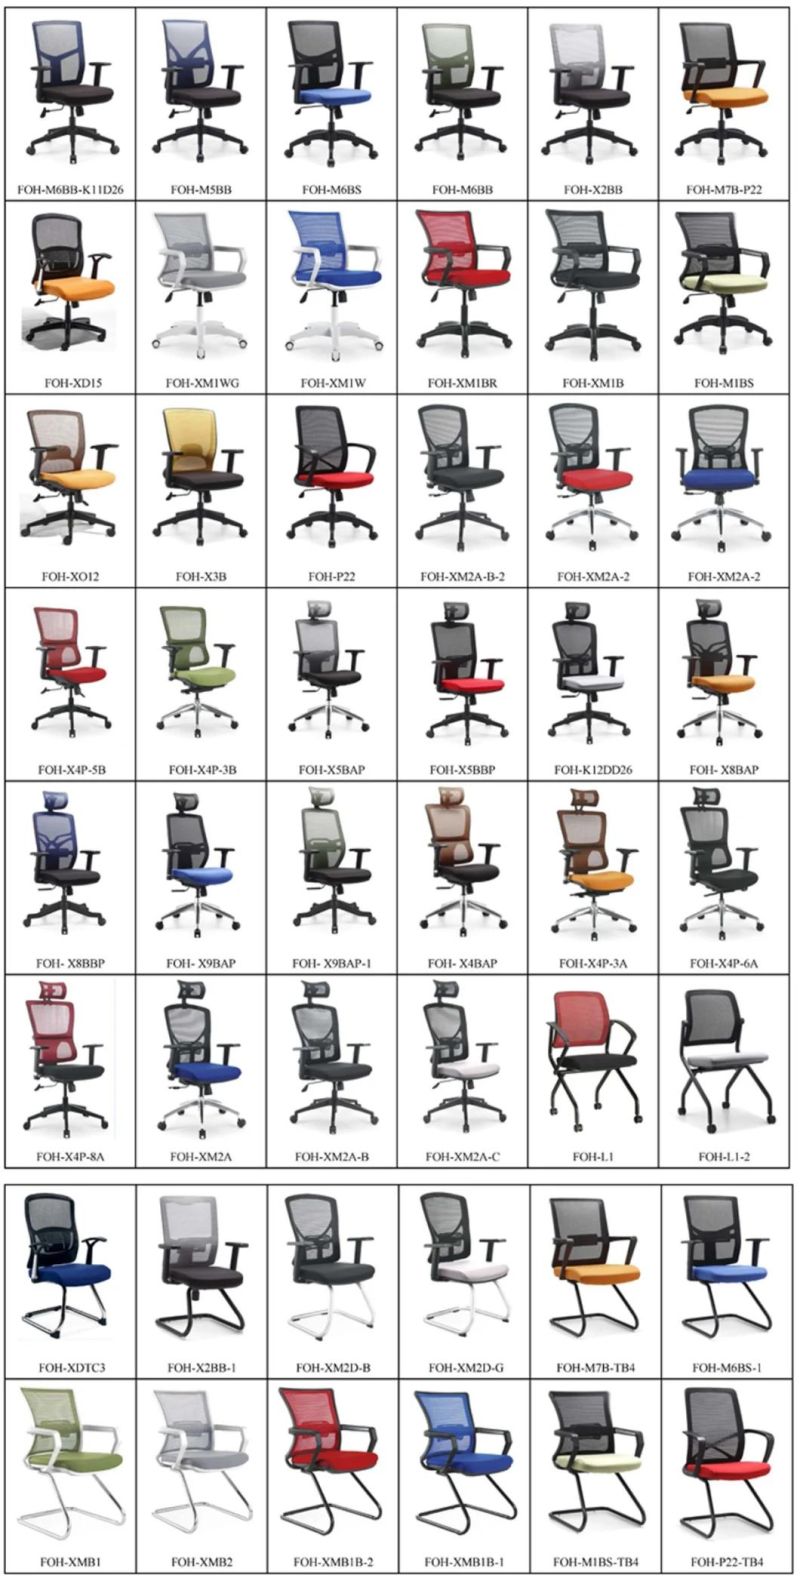 MID Black Modern Office Computer Mesh Chair with White Swivel (FOH-XM1WB)